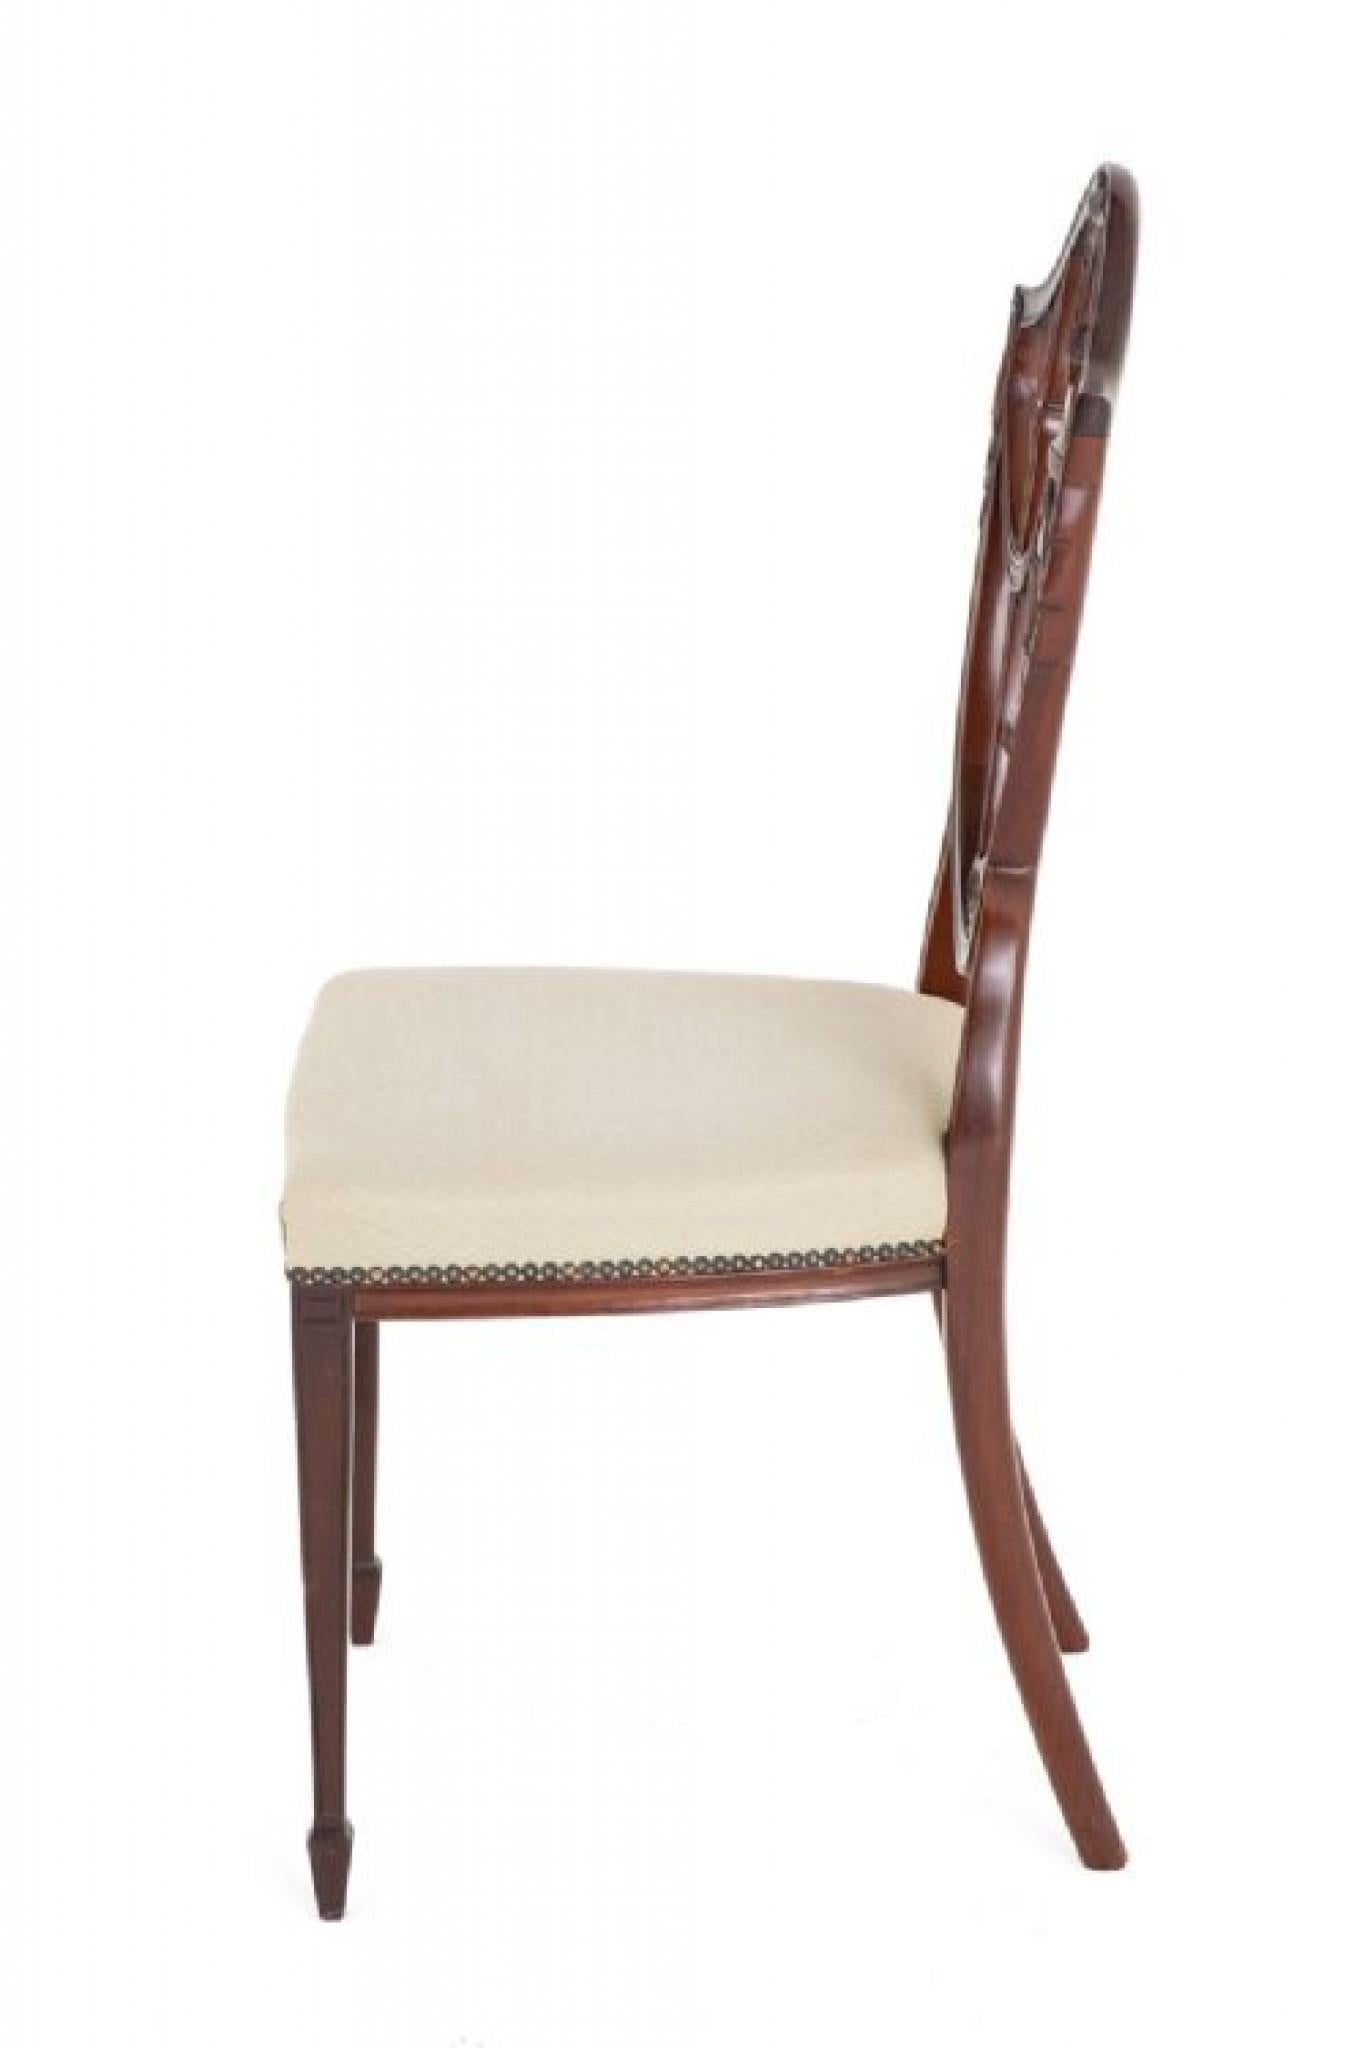 Hepplewhite Side Chair Mahogany Revival 1900 In Good Condition For Sale In Potters Bar, GB